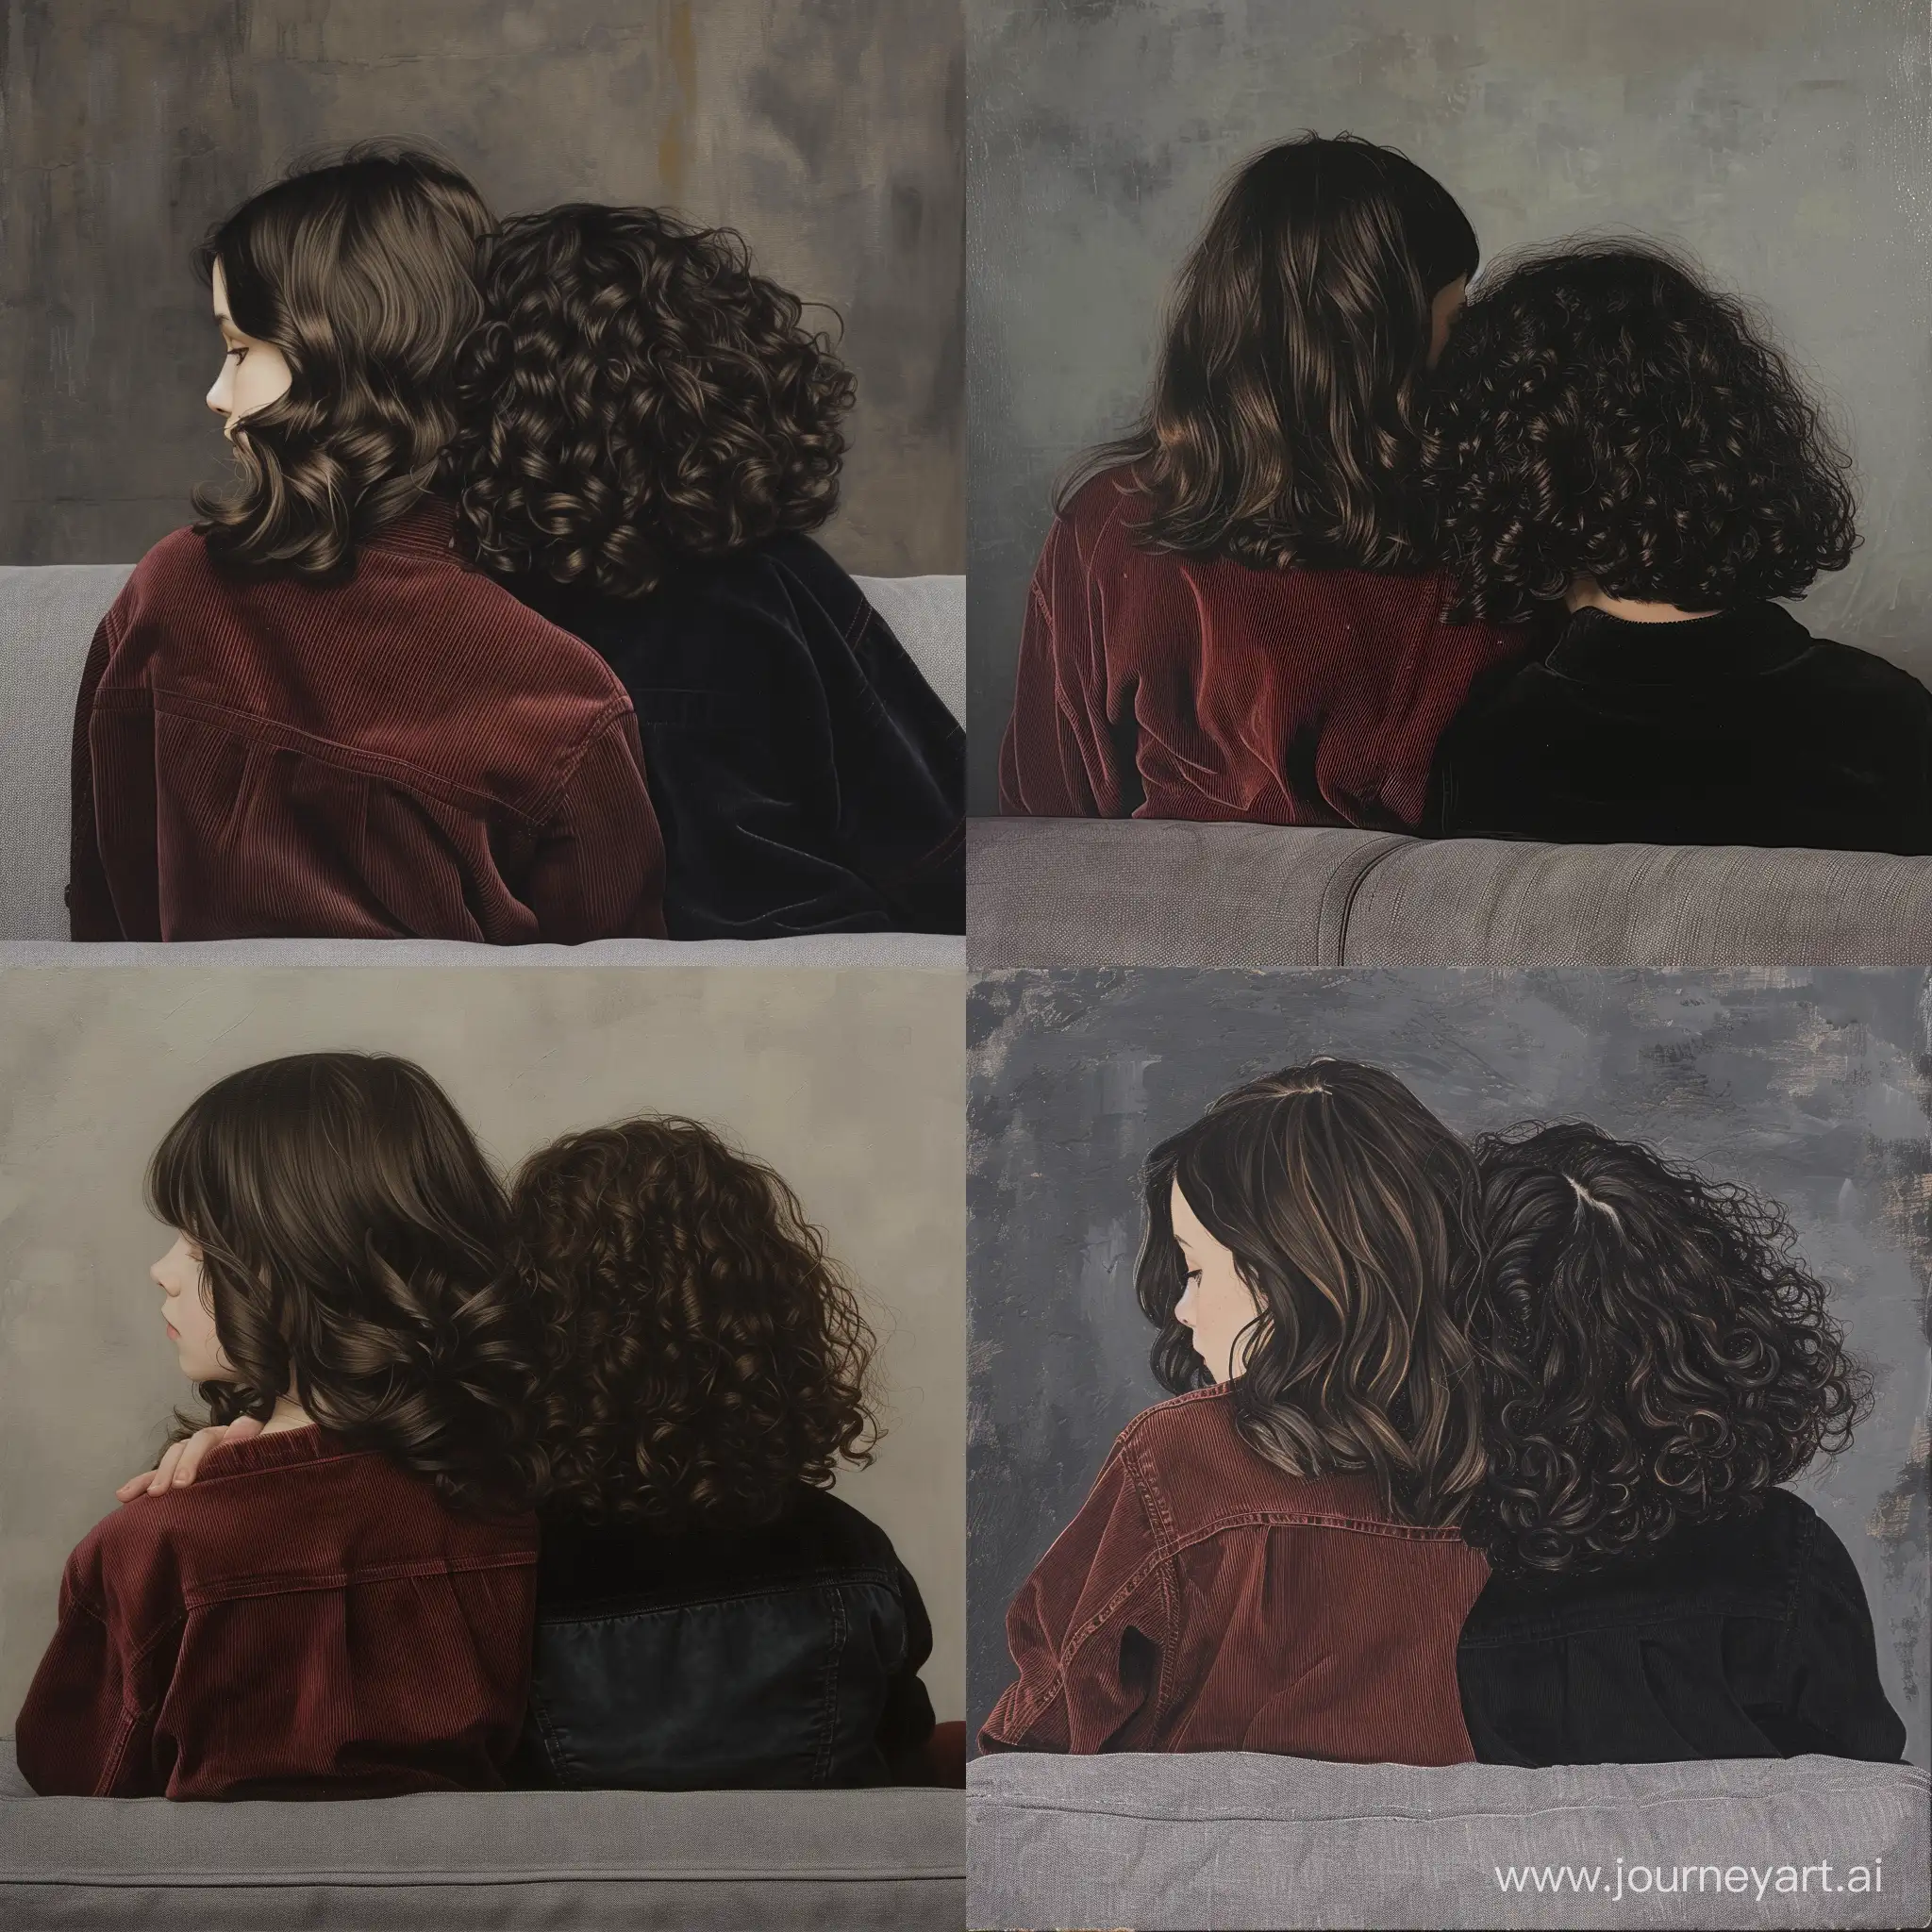 Two teenage girls are sitting on a gray sofa from behind and behind. One of the girls has wavy dark brown hair and white skin and is wearing a crimson corduroy jacket with her head on the other girl's shoulder. The other girl has very curly dark brown hair. And her skin is white and she is a little shorter than the other girl and she is wearing a black corduroy jacket. The background is too televicion.